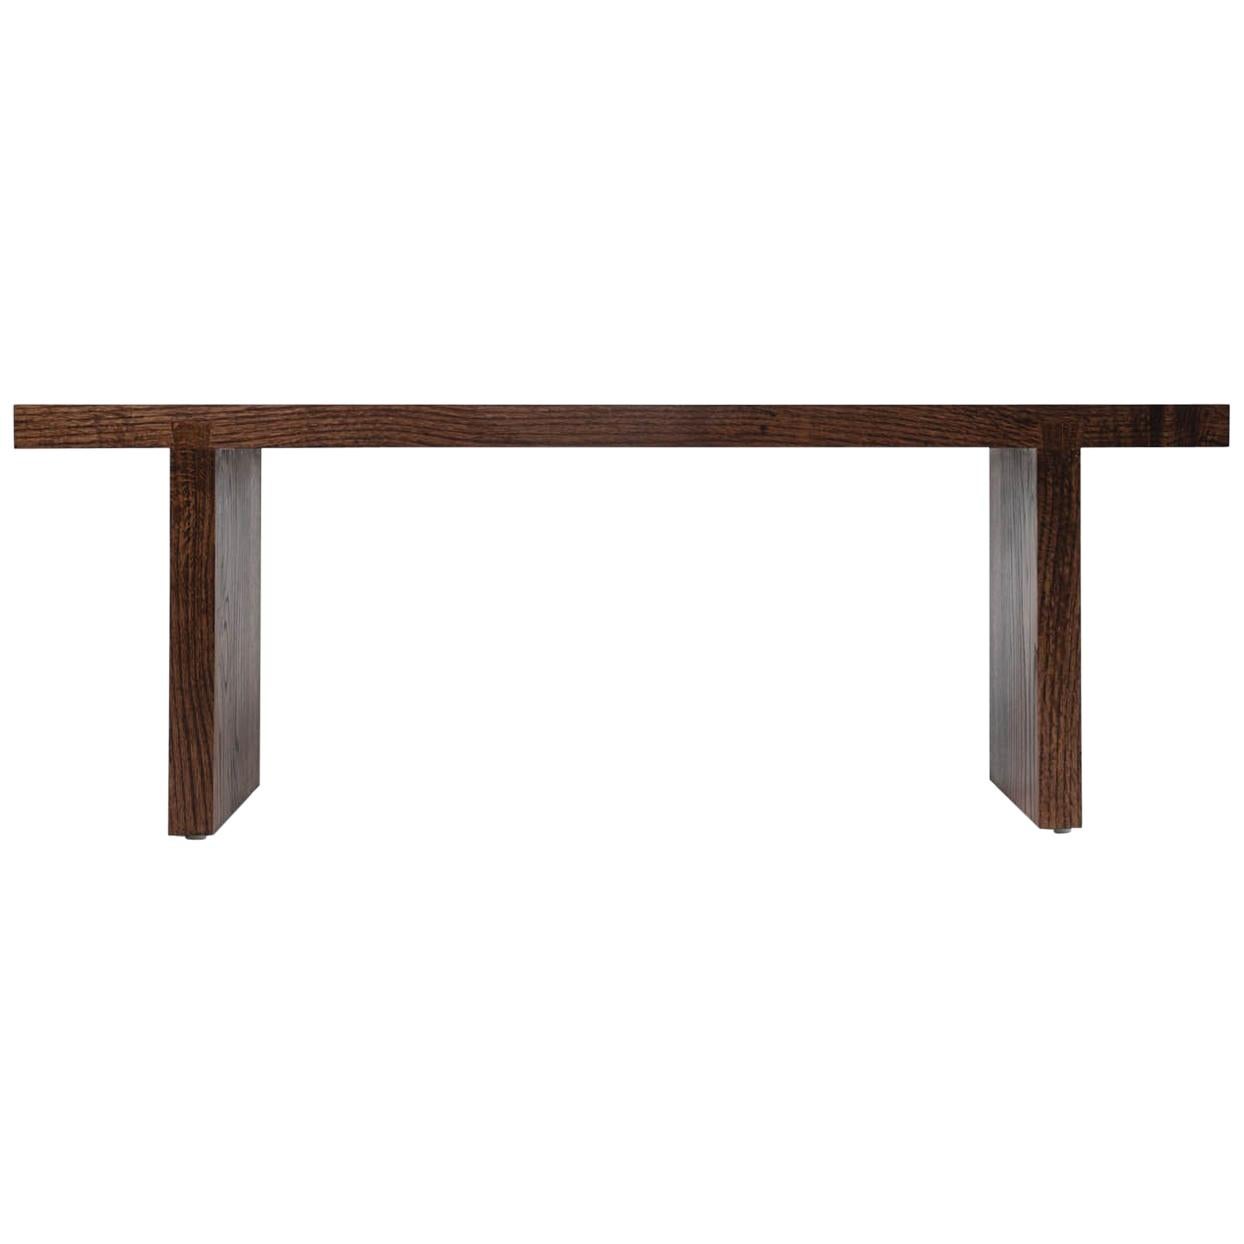 Asian Modern Style Sofa Table or Serving Side Board, Dark Wood, Shipping Dent For Sale 3